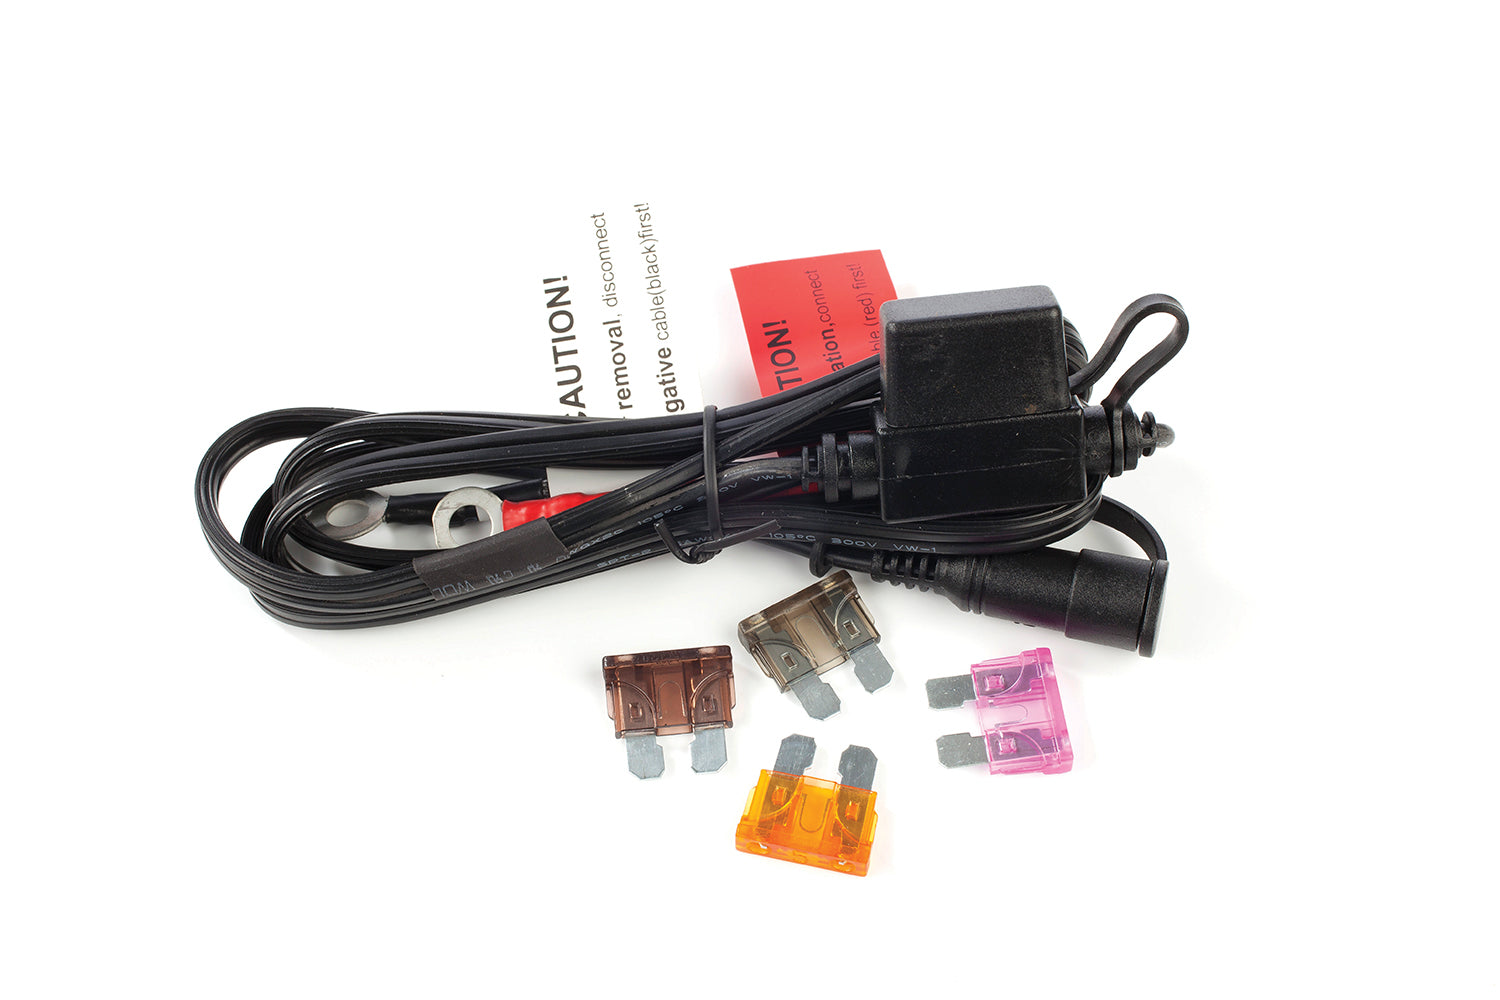 Keis motorcycle power lead for heated clothing